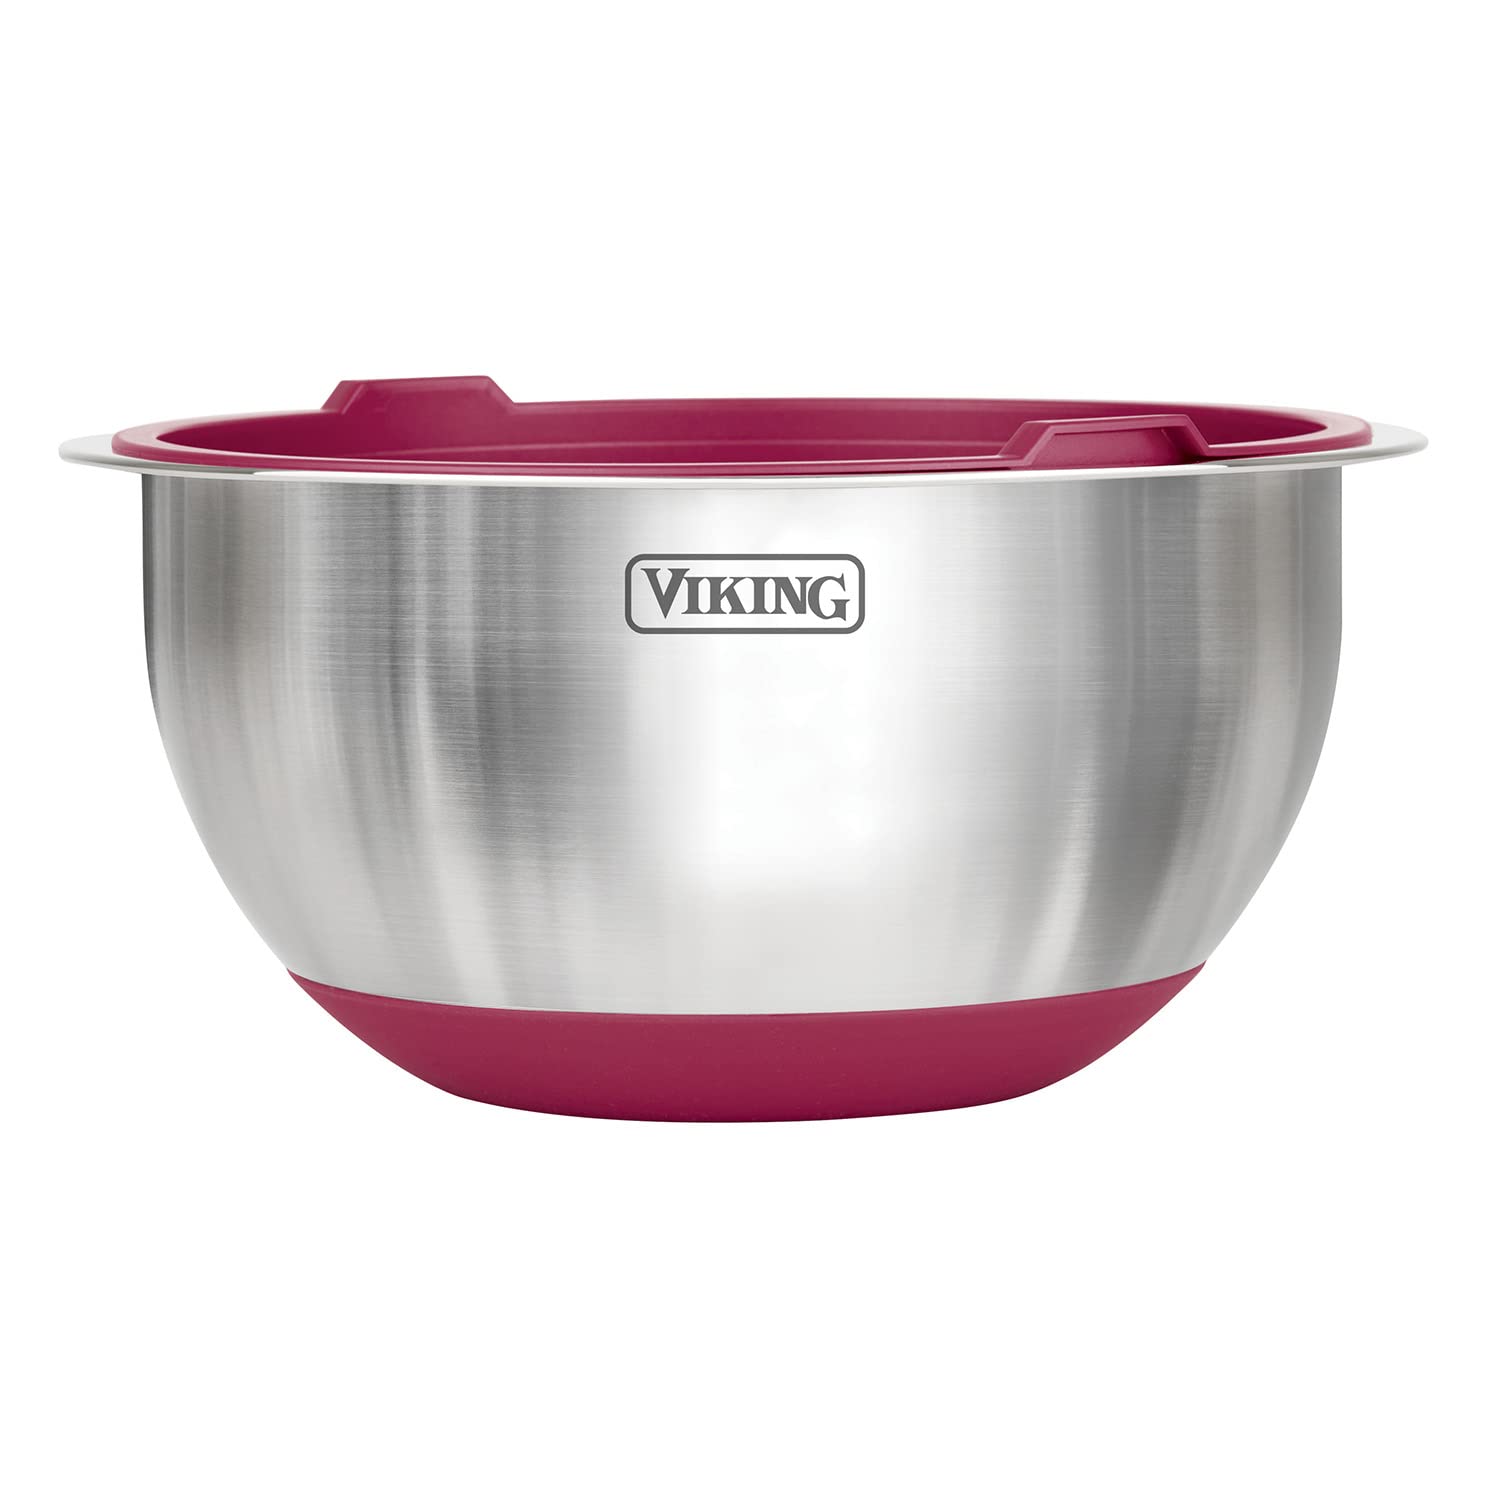 Viking Culinary 10-Piece Stainless Steel Bowl Set, Red (40015-9990RPLT1)